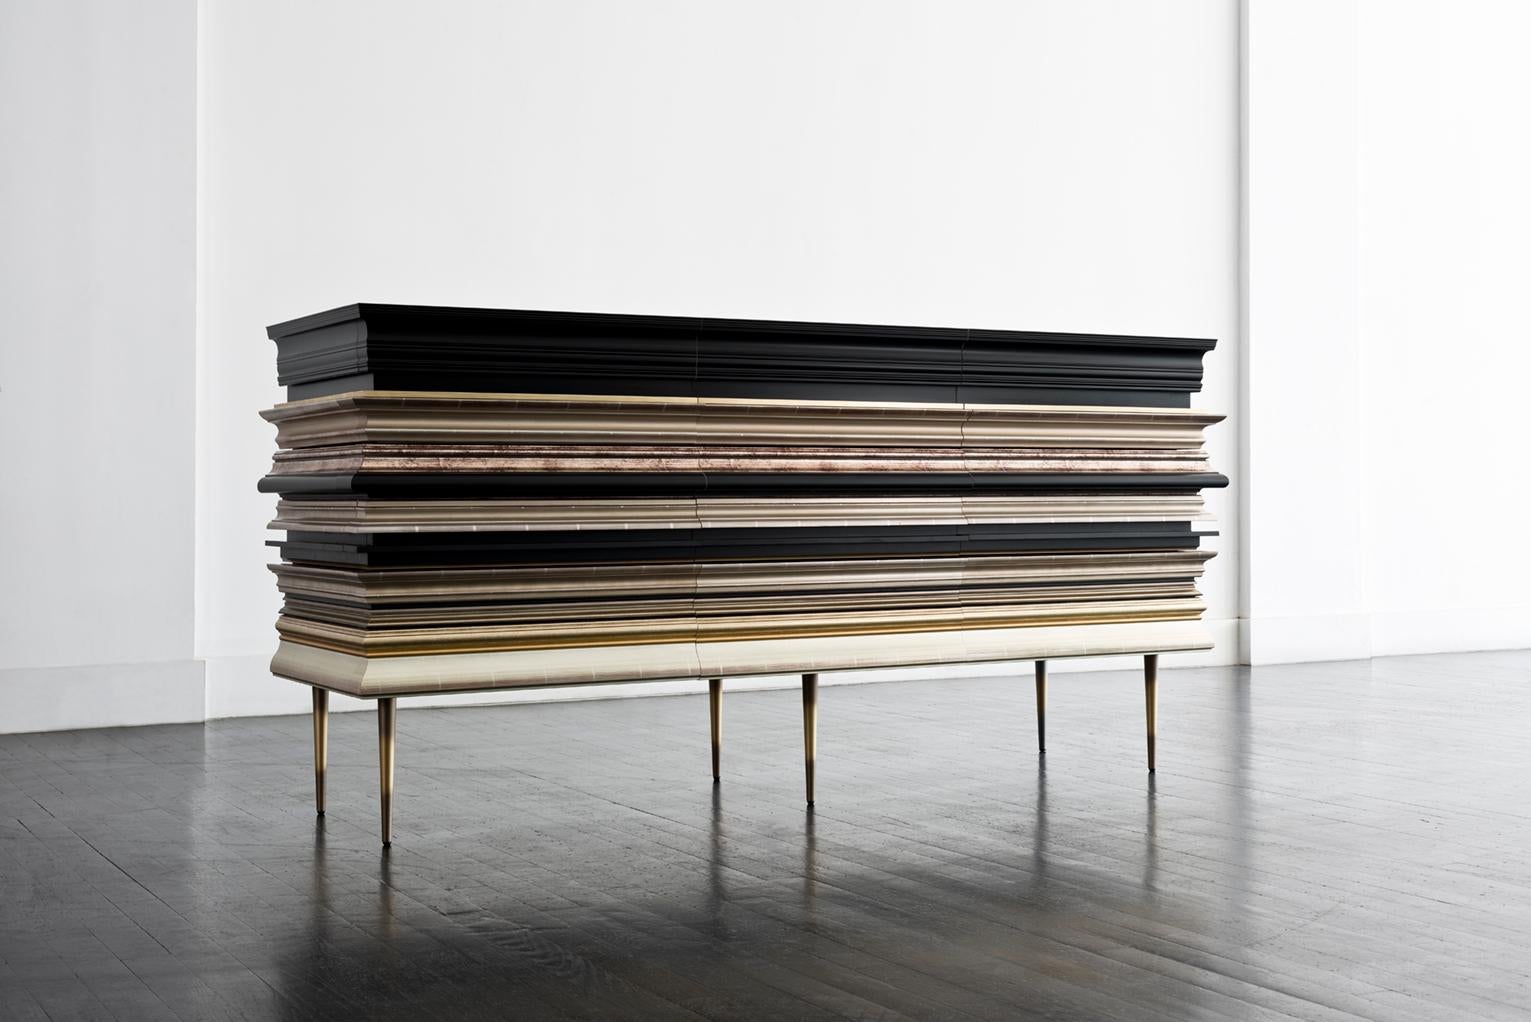 Frame Credenza long by Luis Pons
Dimensions: W 152.5 x D 53.5 x H 76 cm
Materials: Metal, wood, bronzed, hand-crafted, lacquered

Also available in different colors

Fine crafted wood moldings are applied to the whole piece, concealing drawers